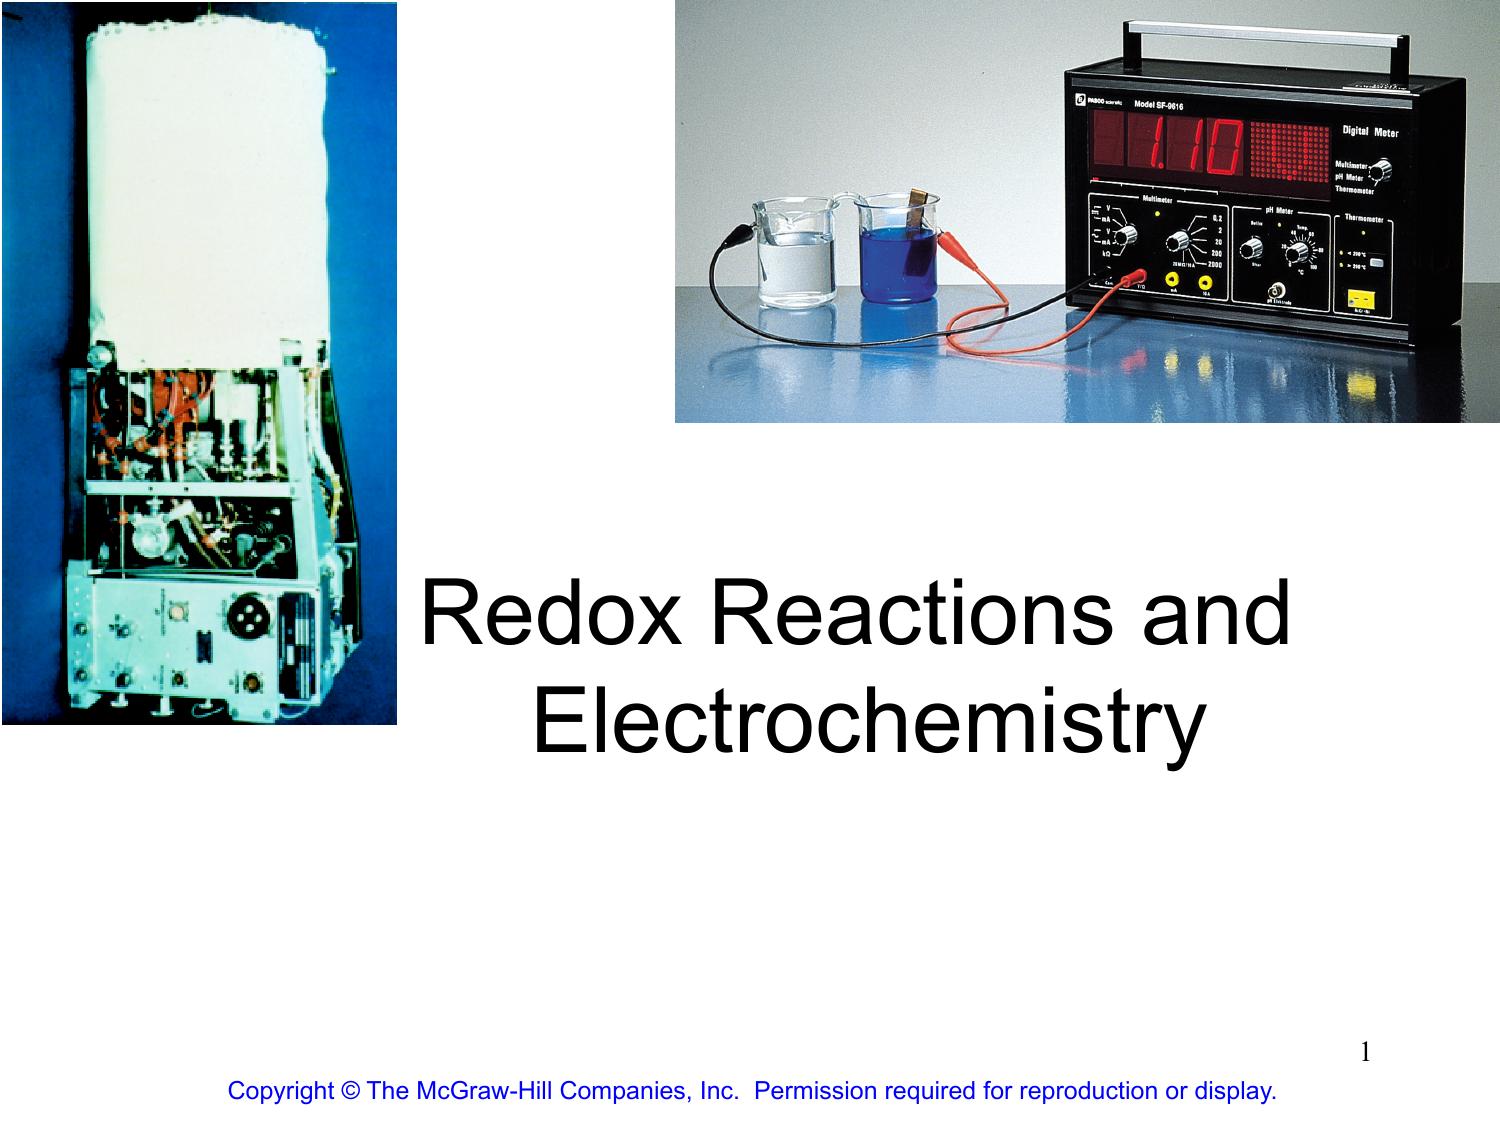 Redox reaction and electrochemistry